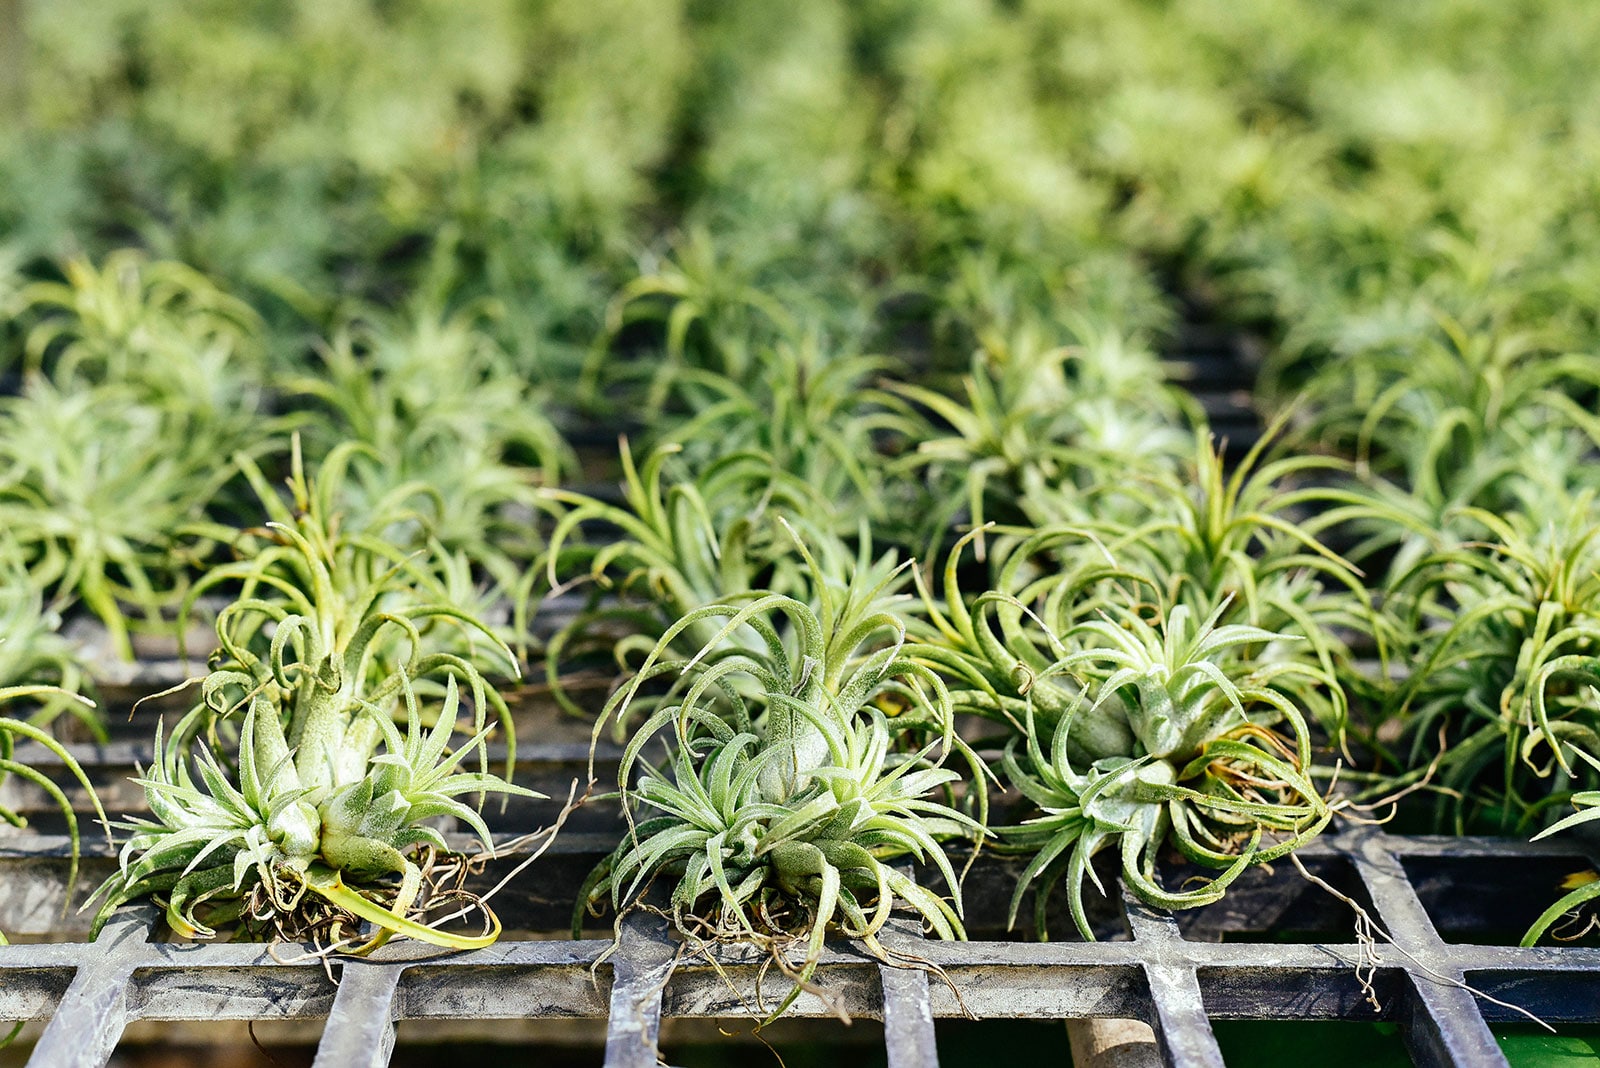 Dozens of air plants being propagated in a nursery on a wooden shelf